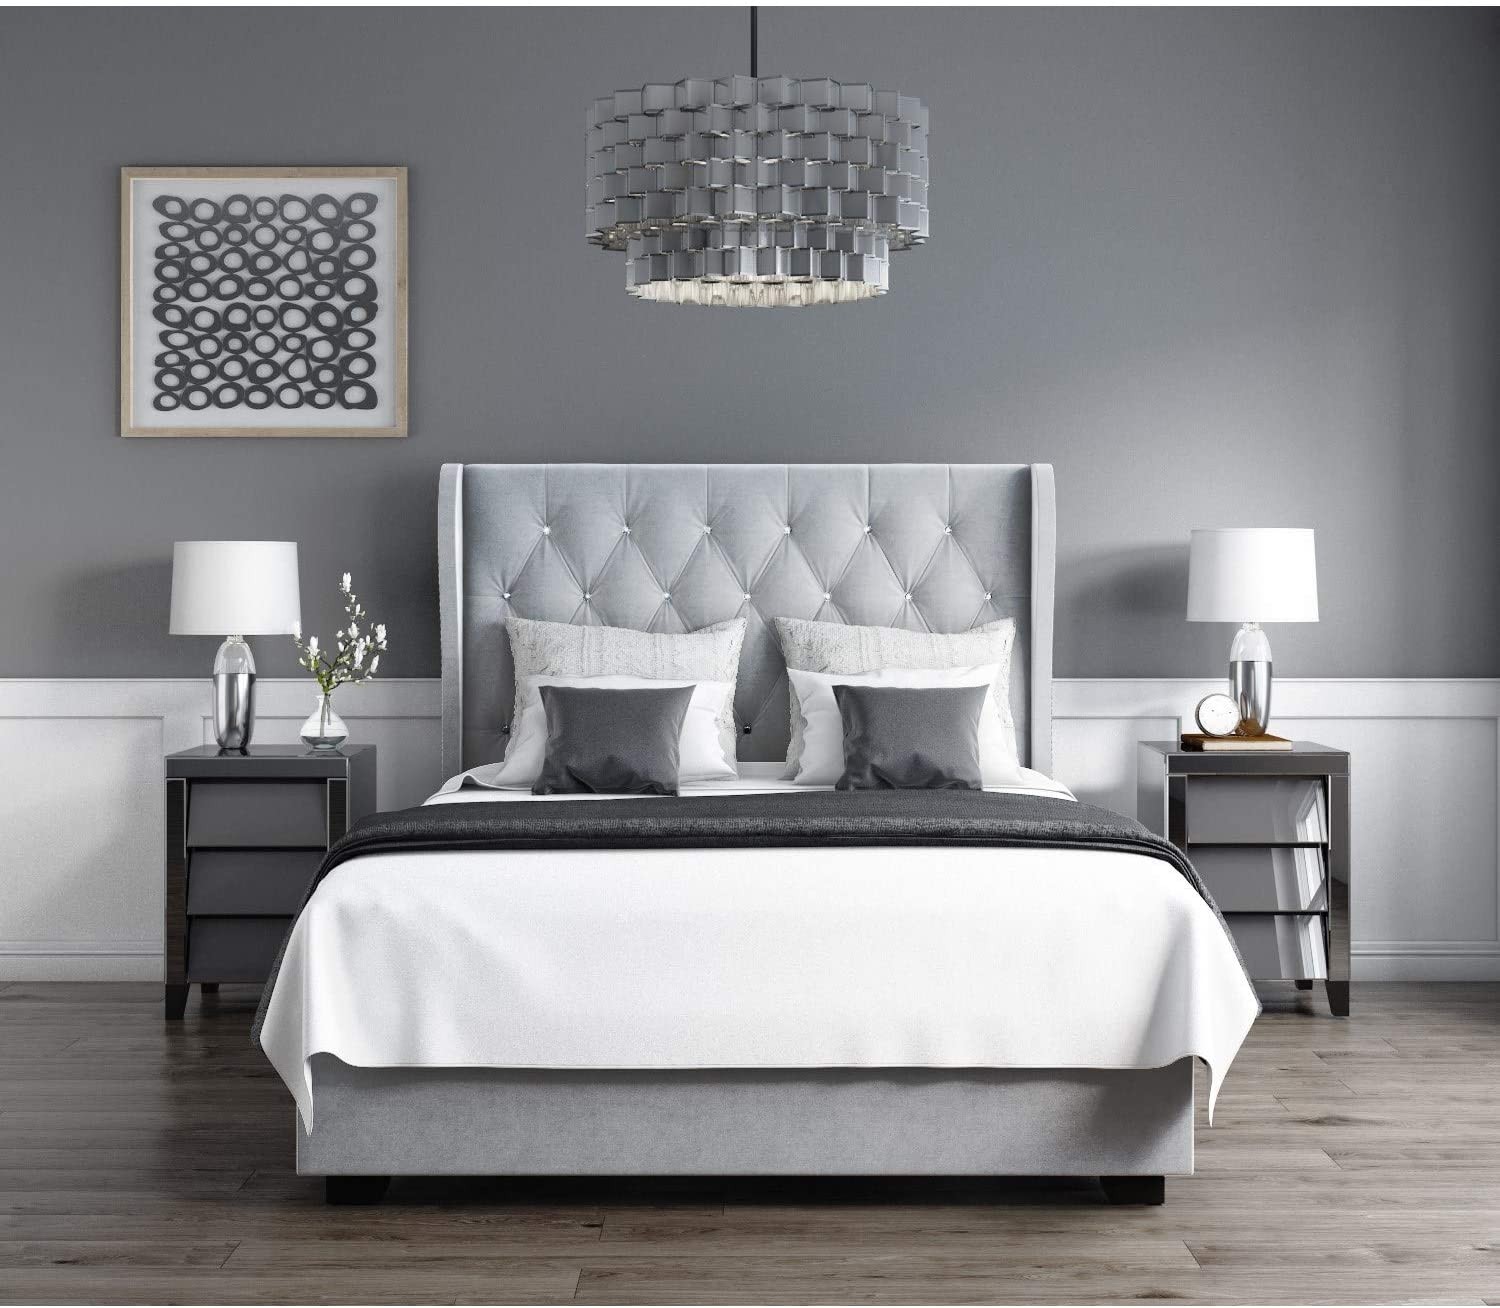 Double studded upholstered headboard naples fabrics silver